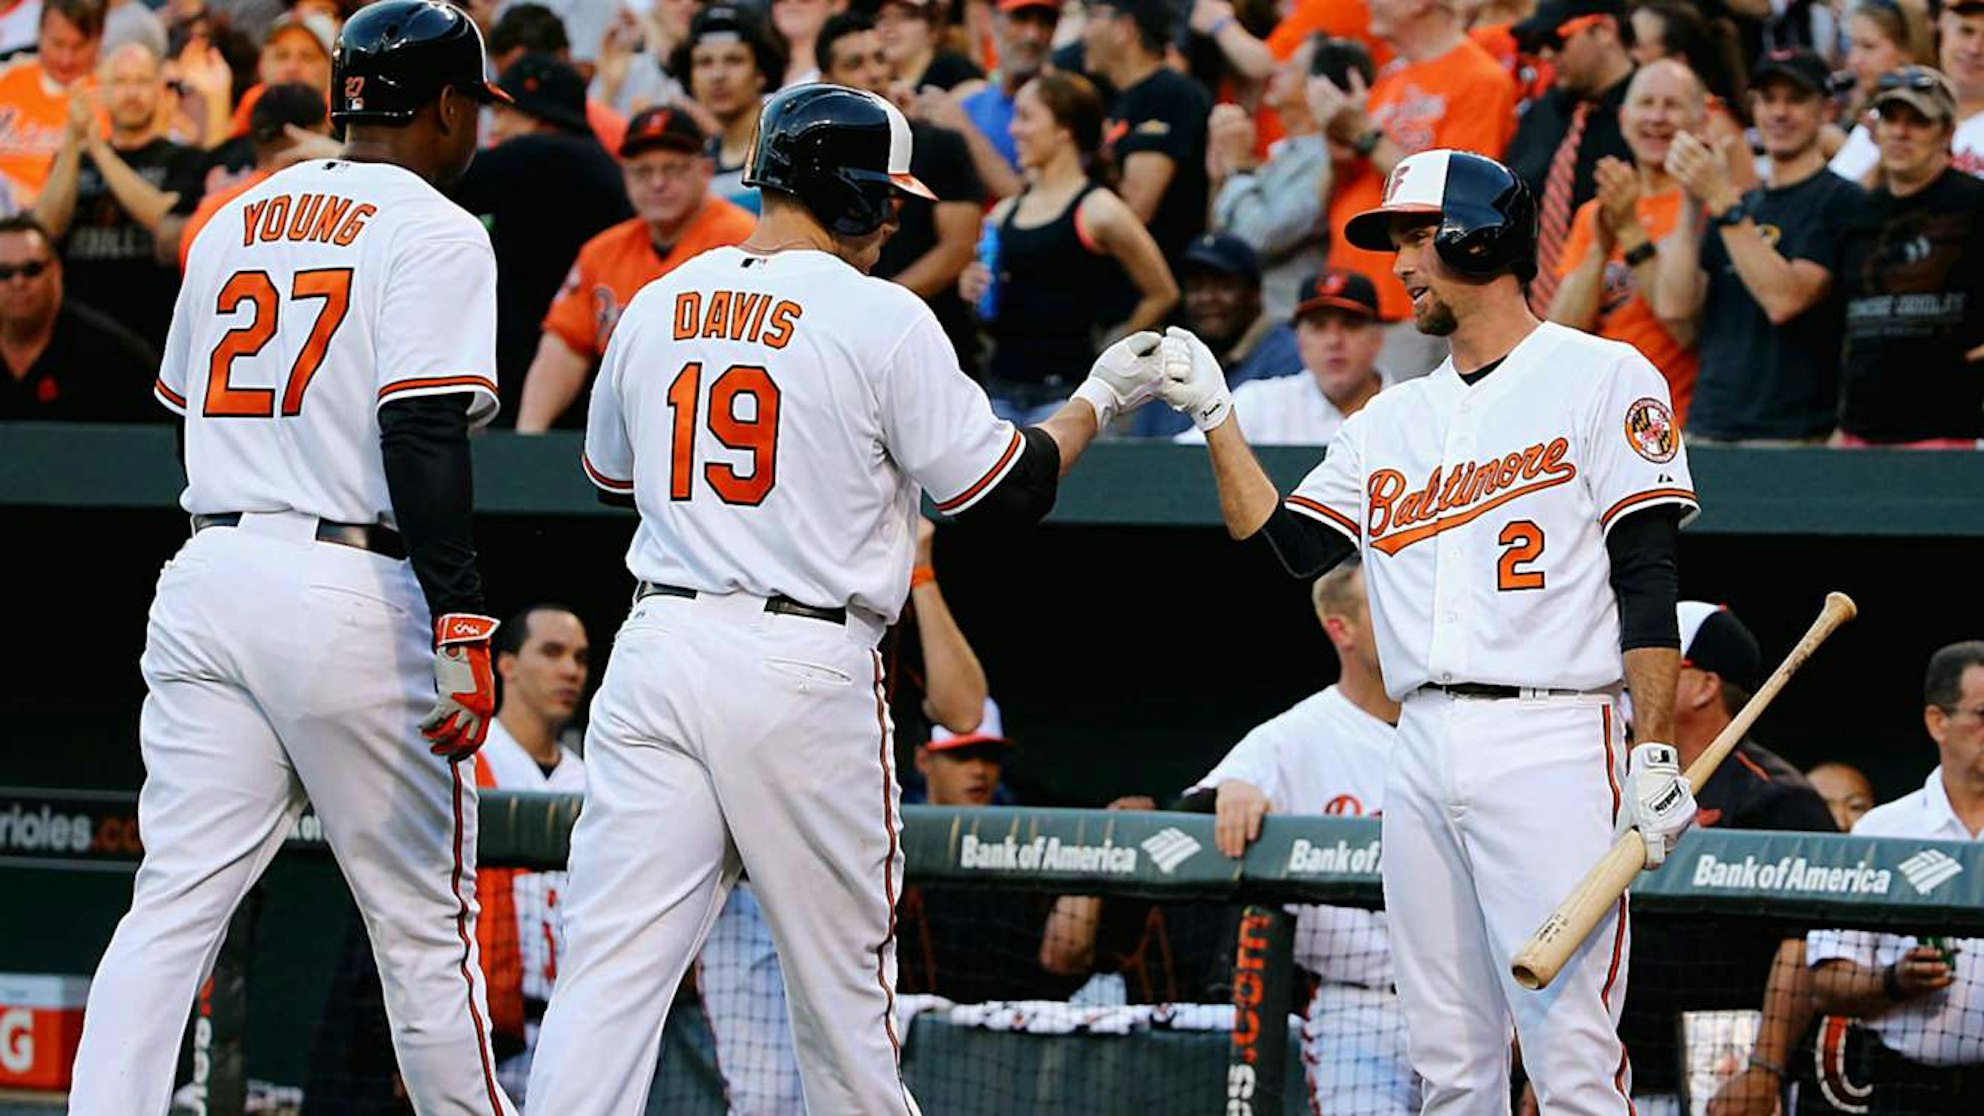 The Orioles Hope for a Reboot With "ReOpening Day"